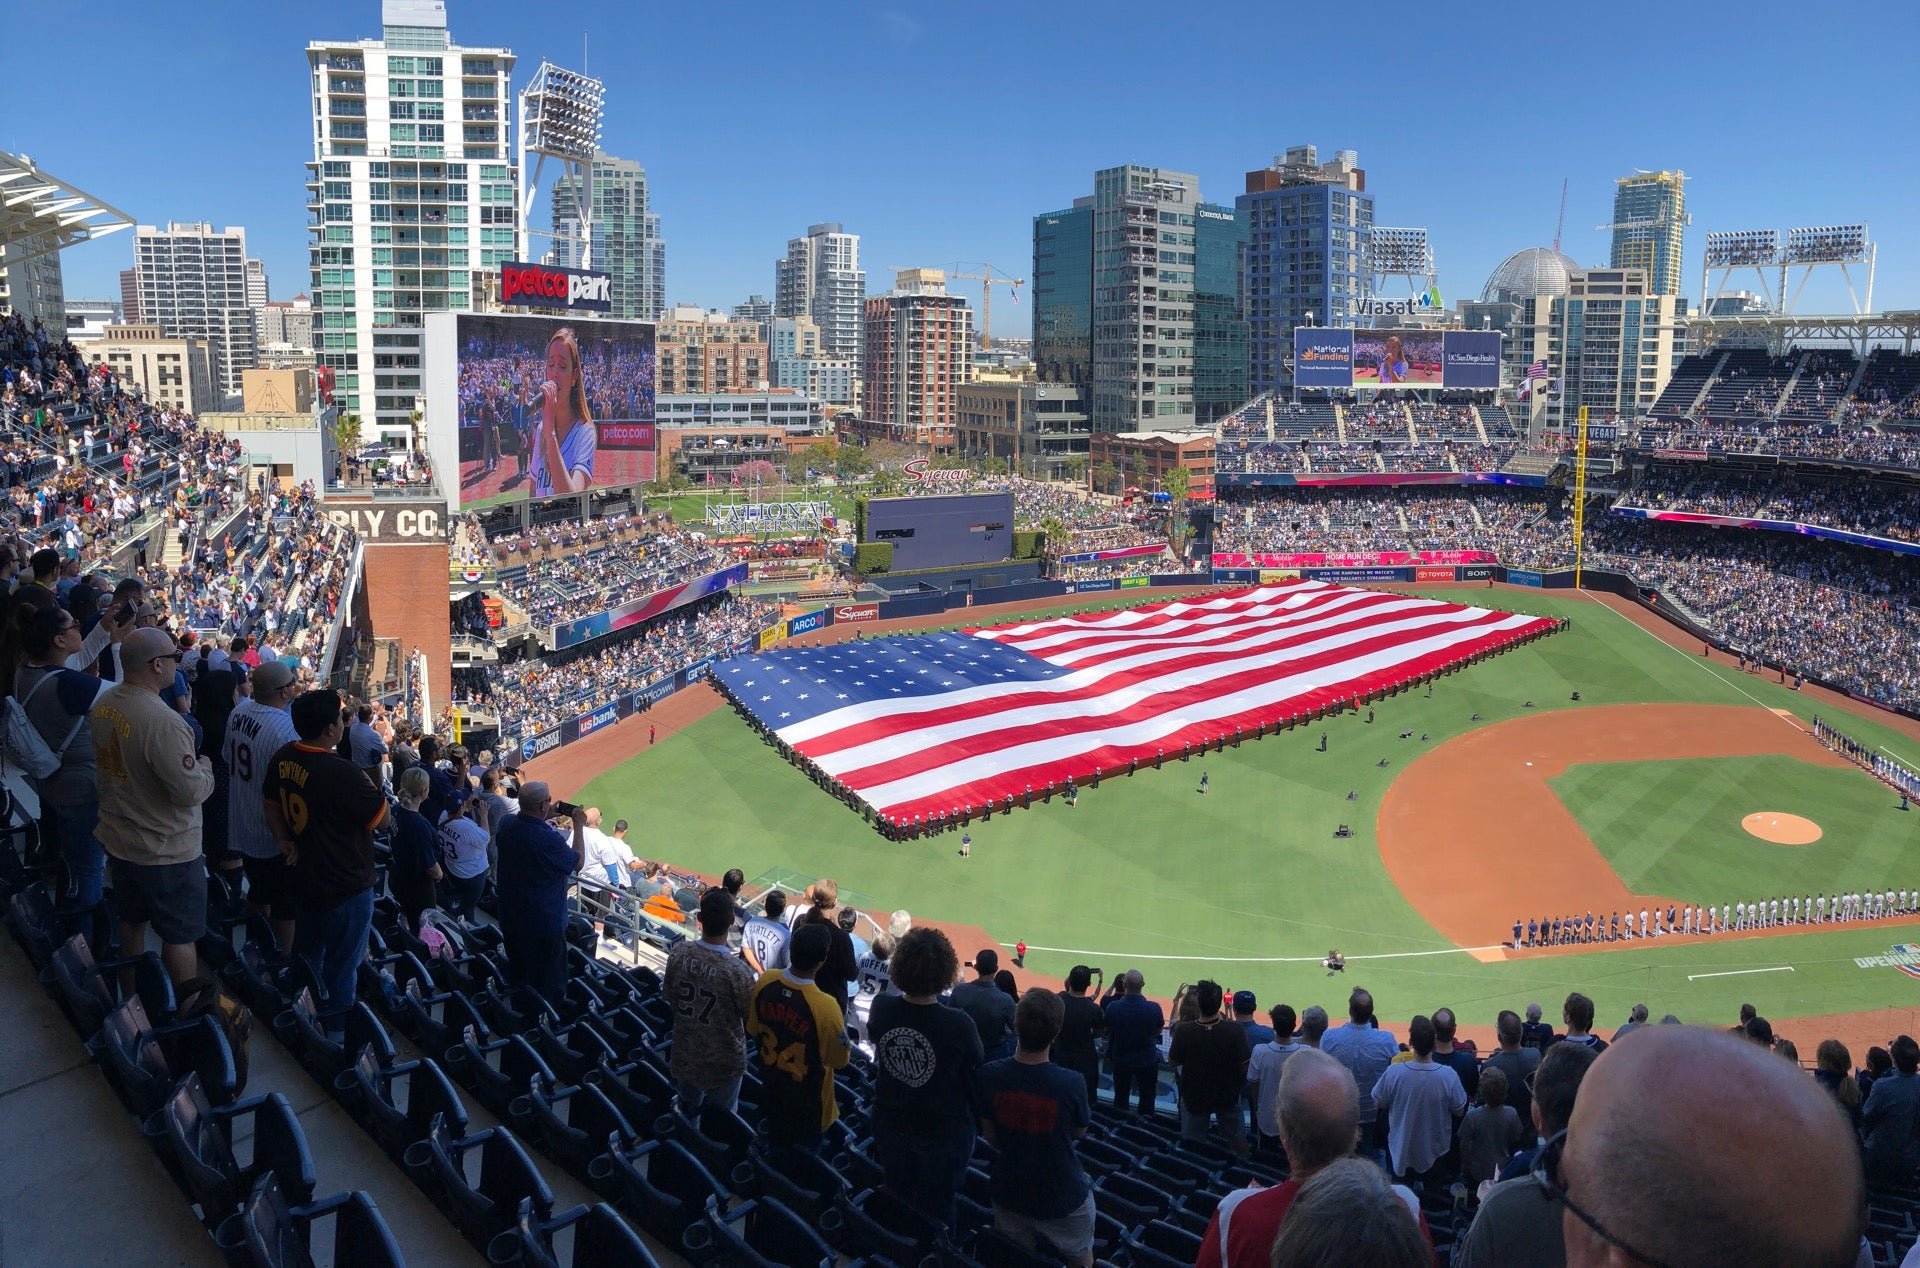 Football is no longer prohibited at Petco Park - The San Diego